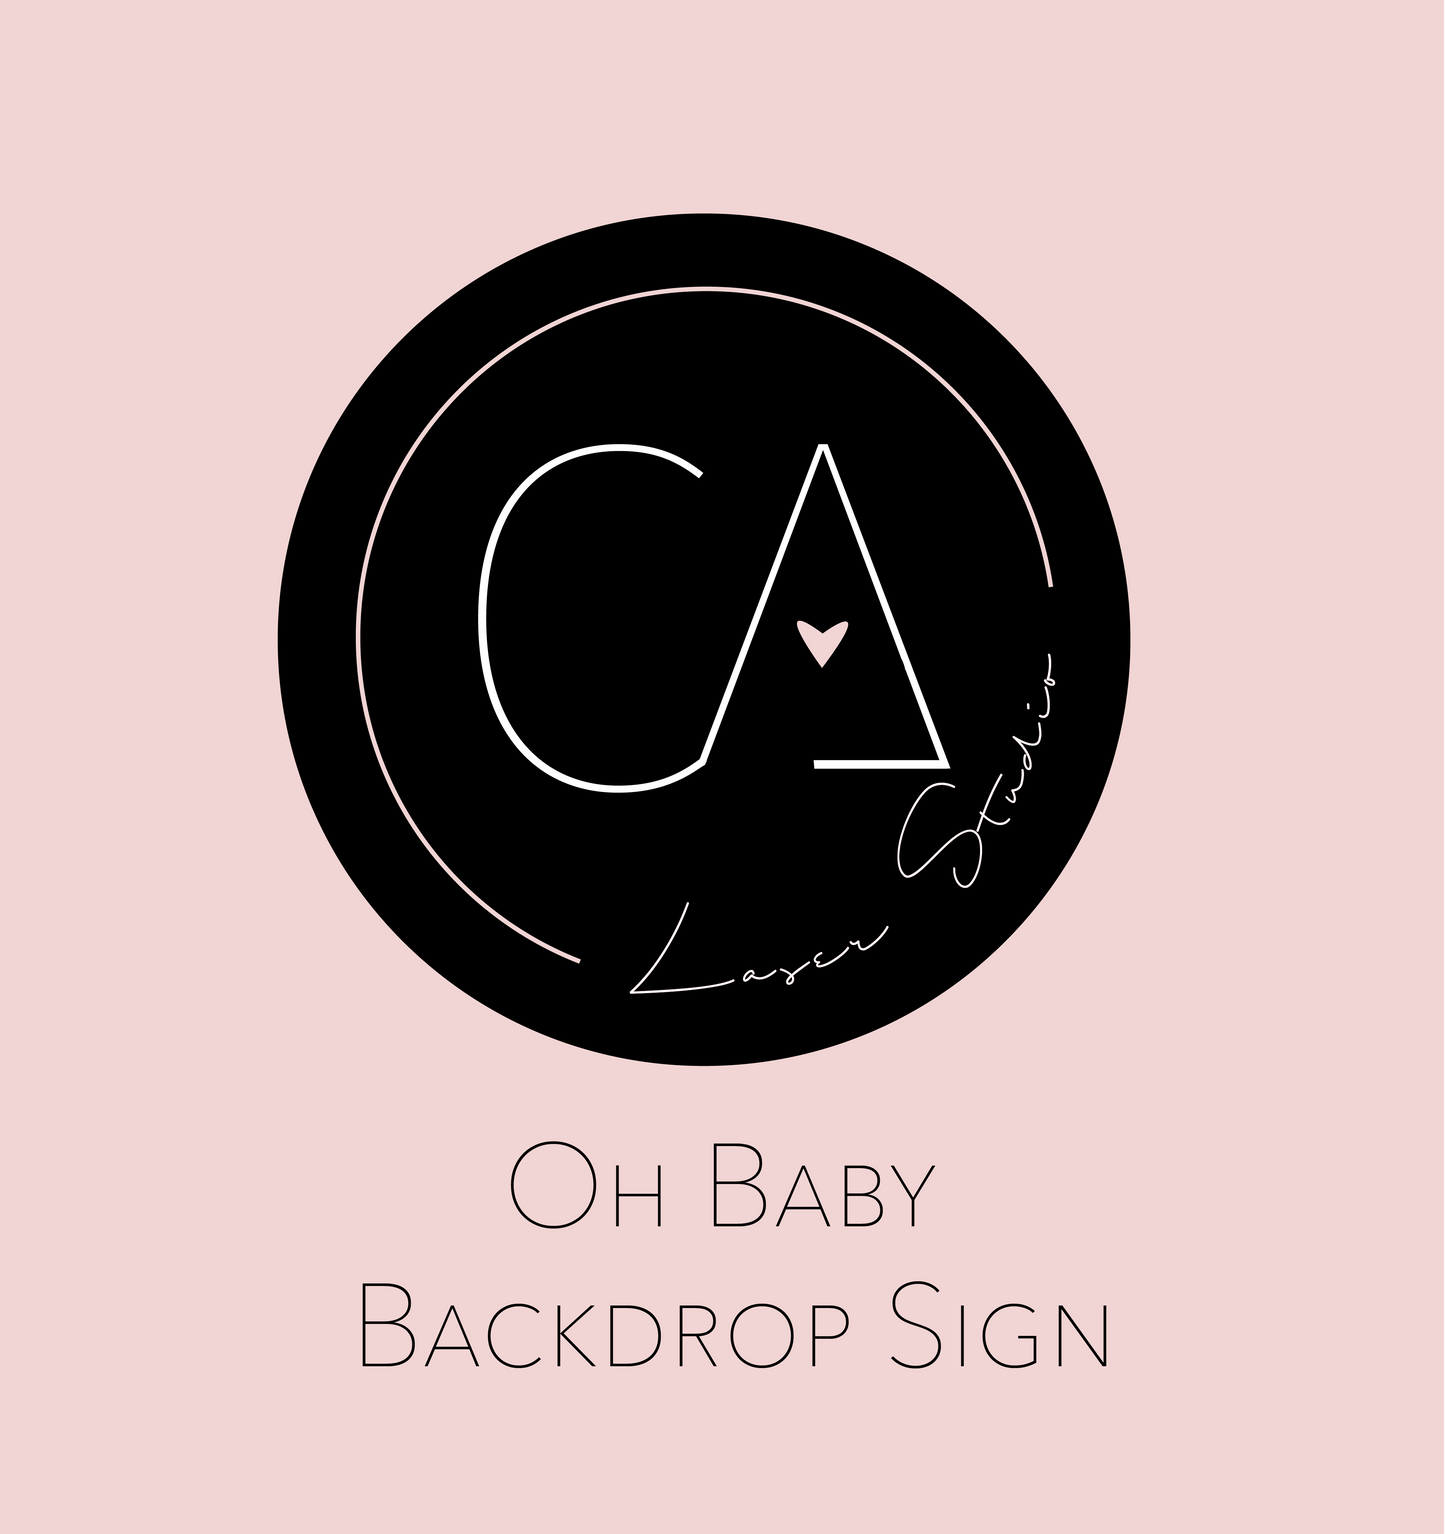 Oh Baby Backdrop Sign